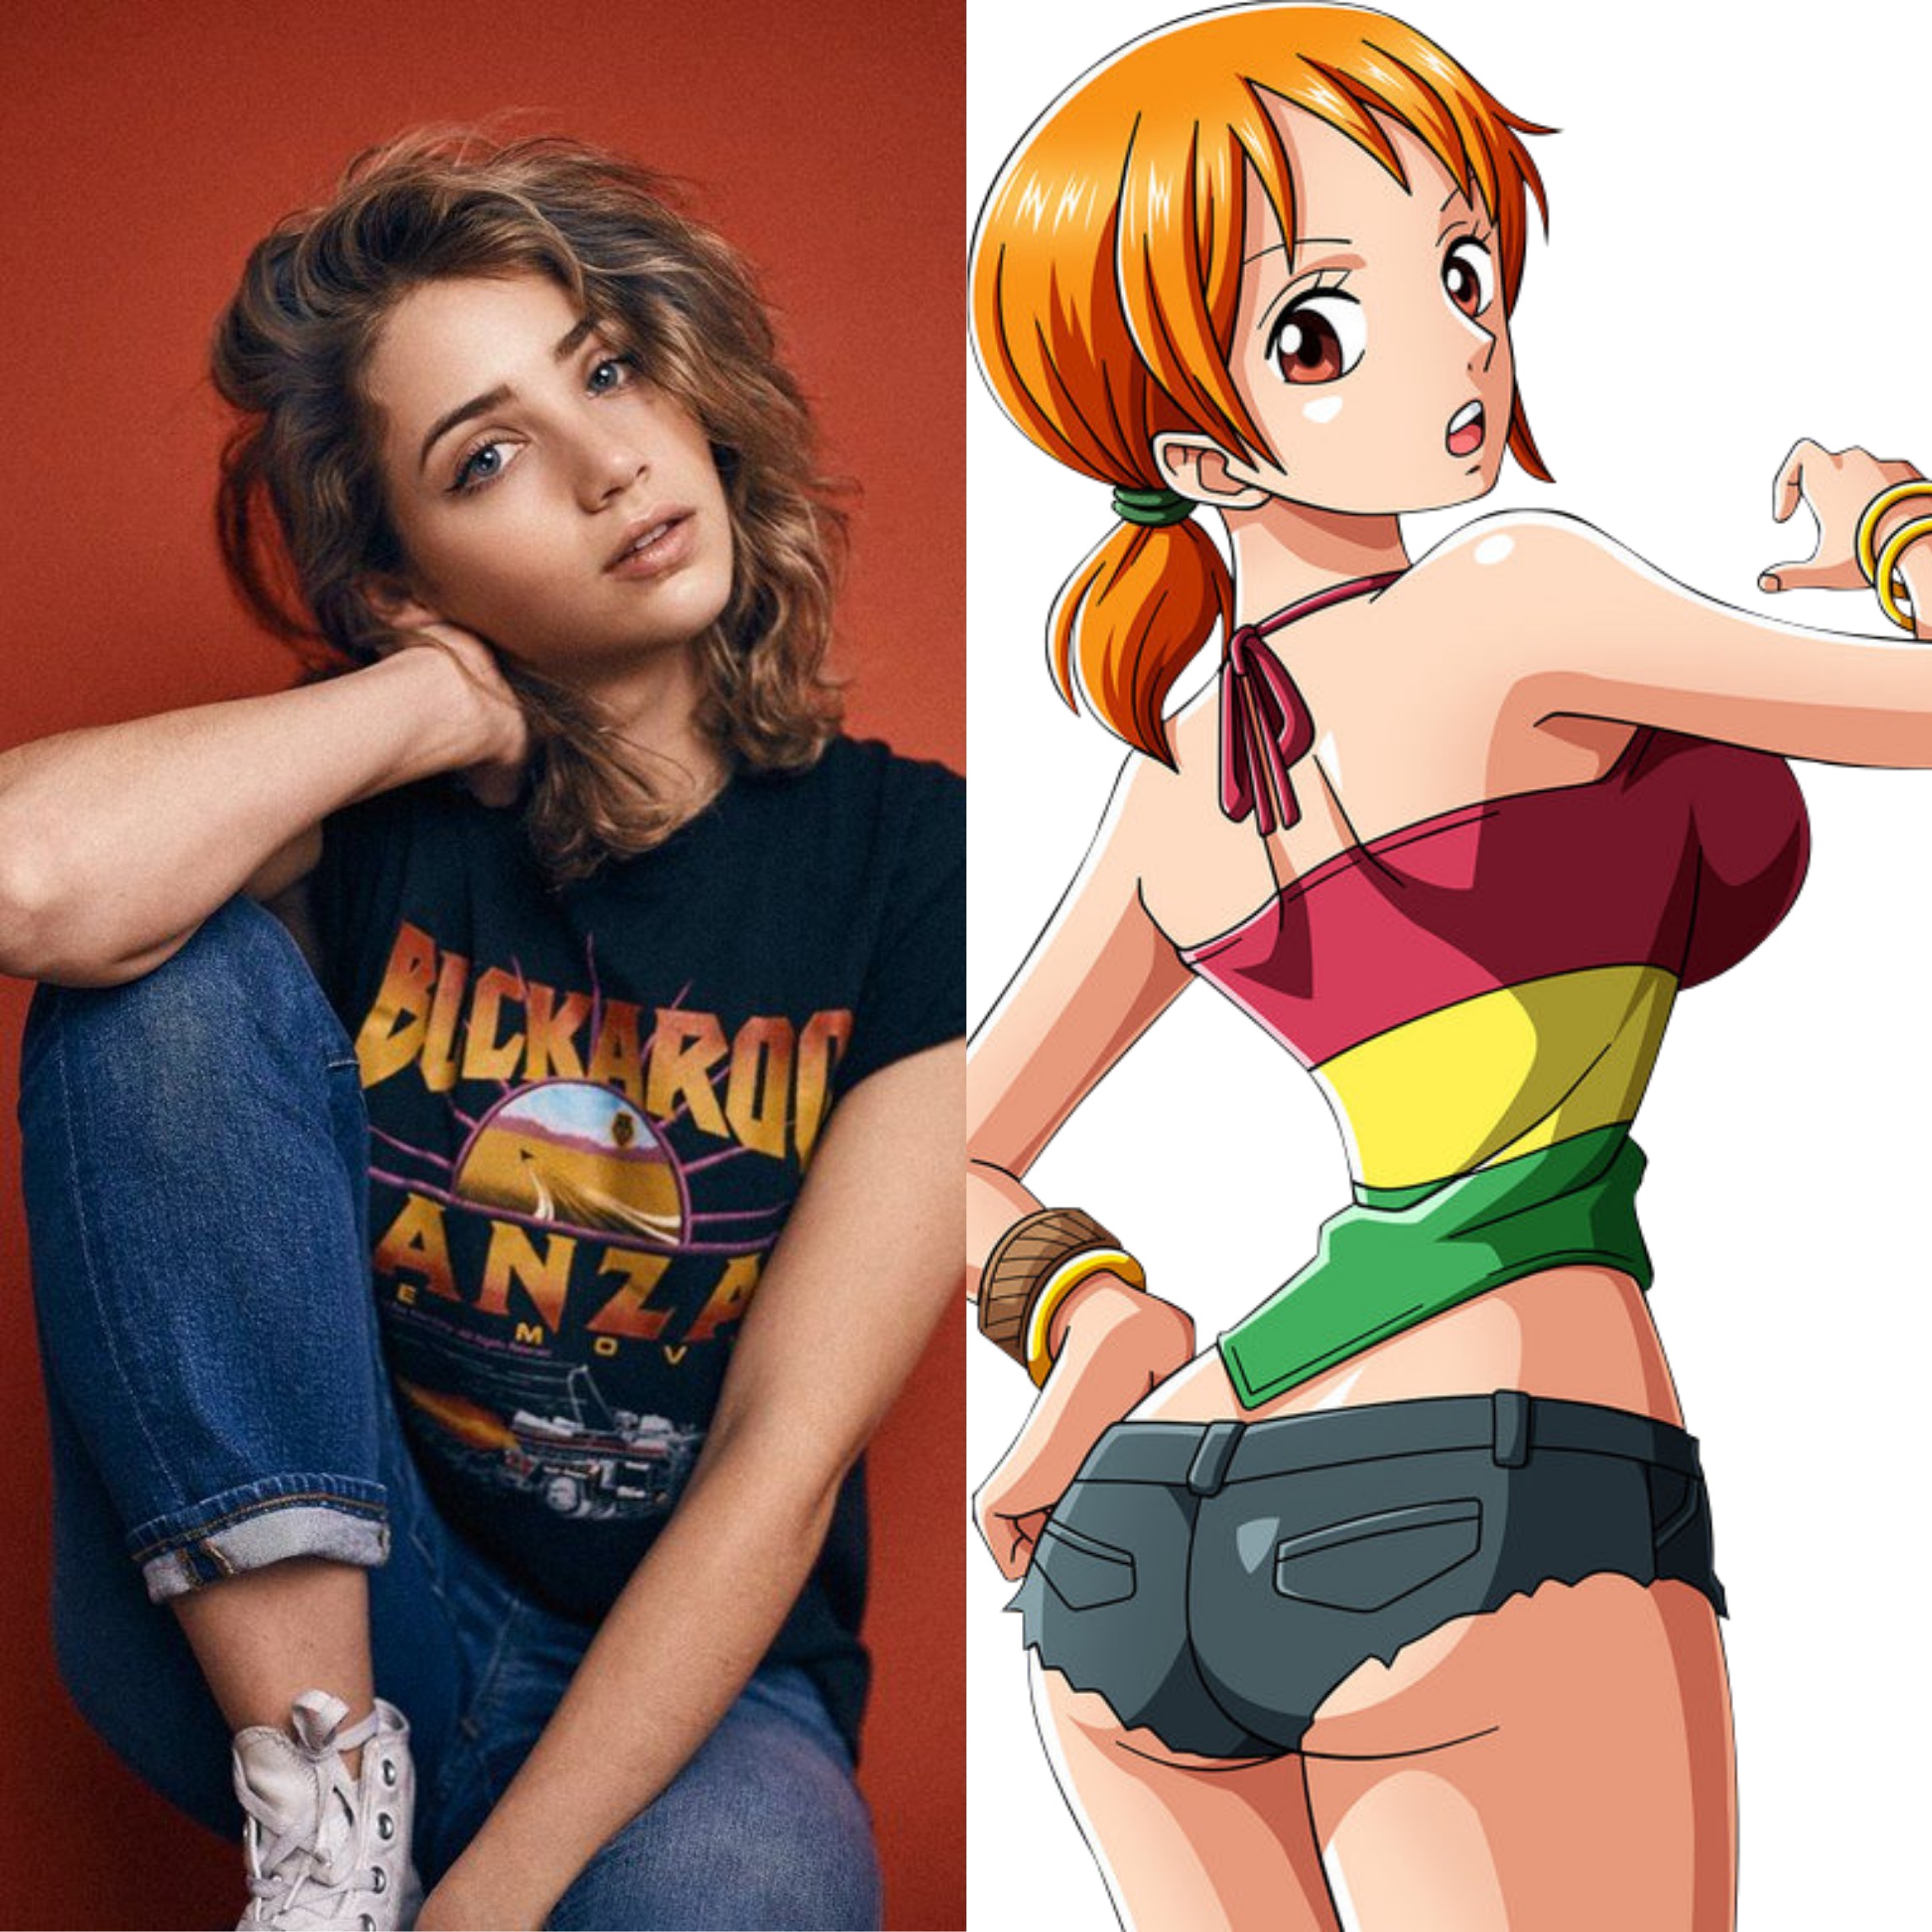 Nami Fan Casting for One Piece